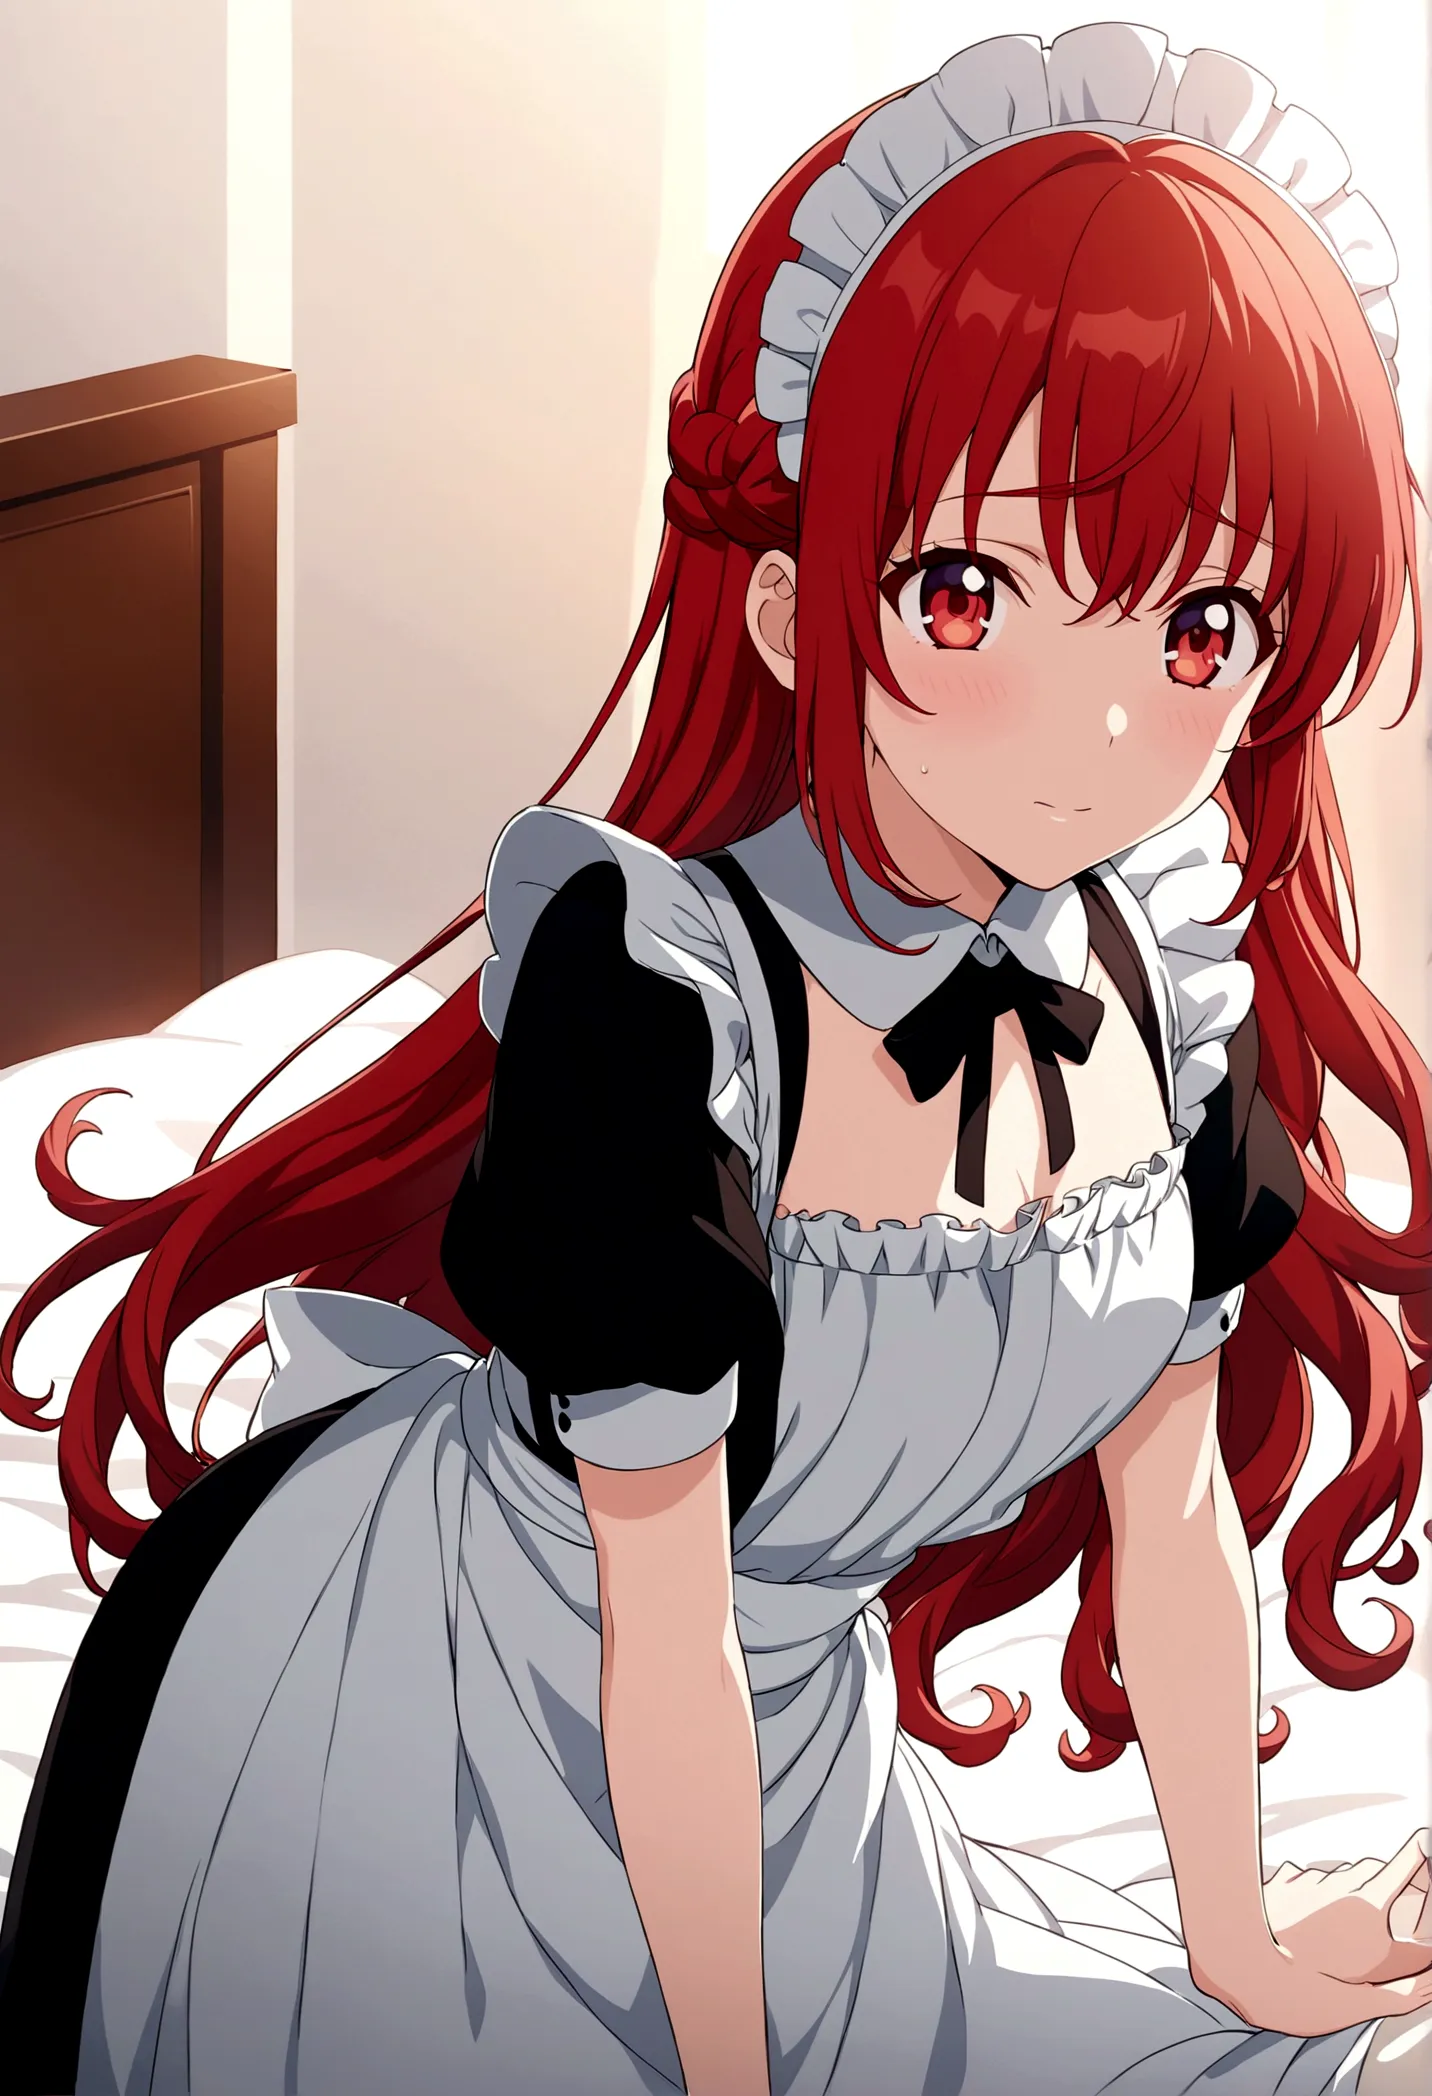 Anime girl with red hair and white apron lying in bed, Comedian Reactions、anime girl in a Maid costume, Cute girl anime visuals,...